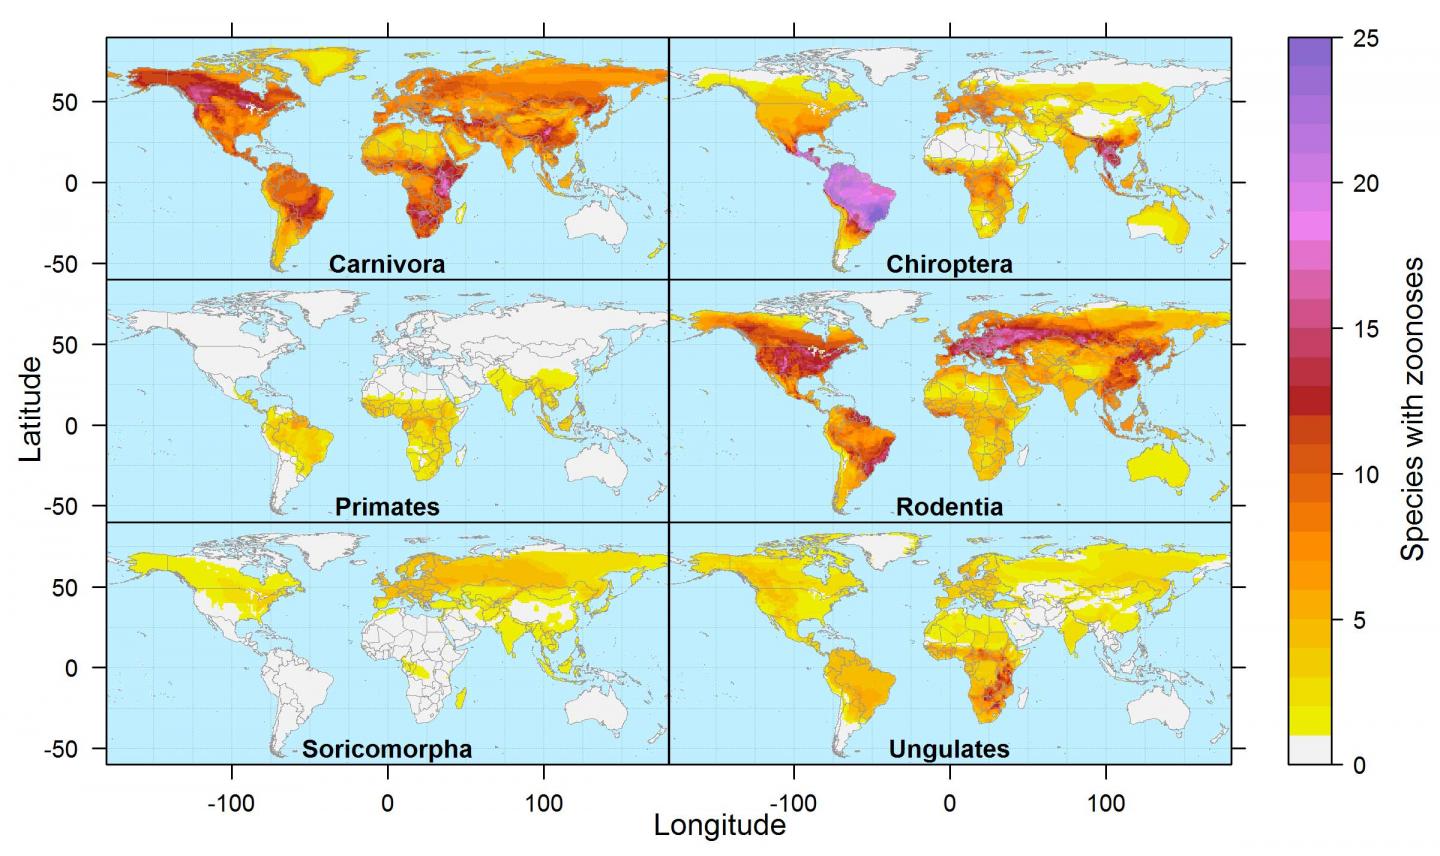 Global Hotspots of Zoonoses by Mammalian Clades